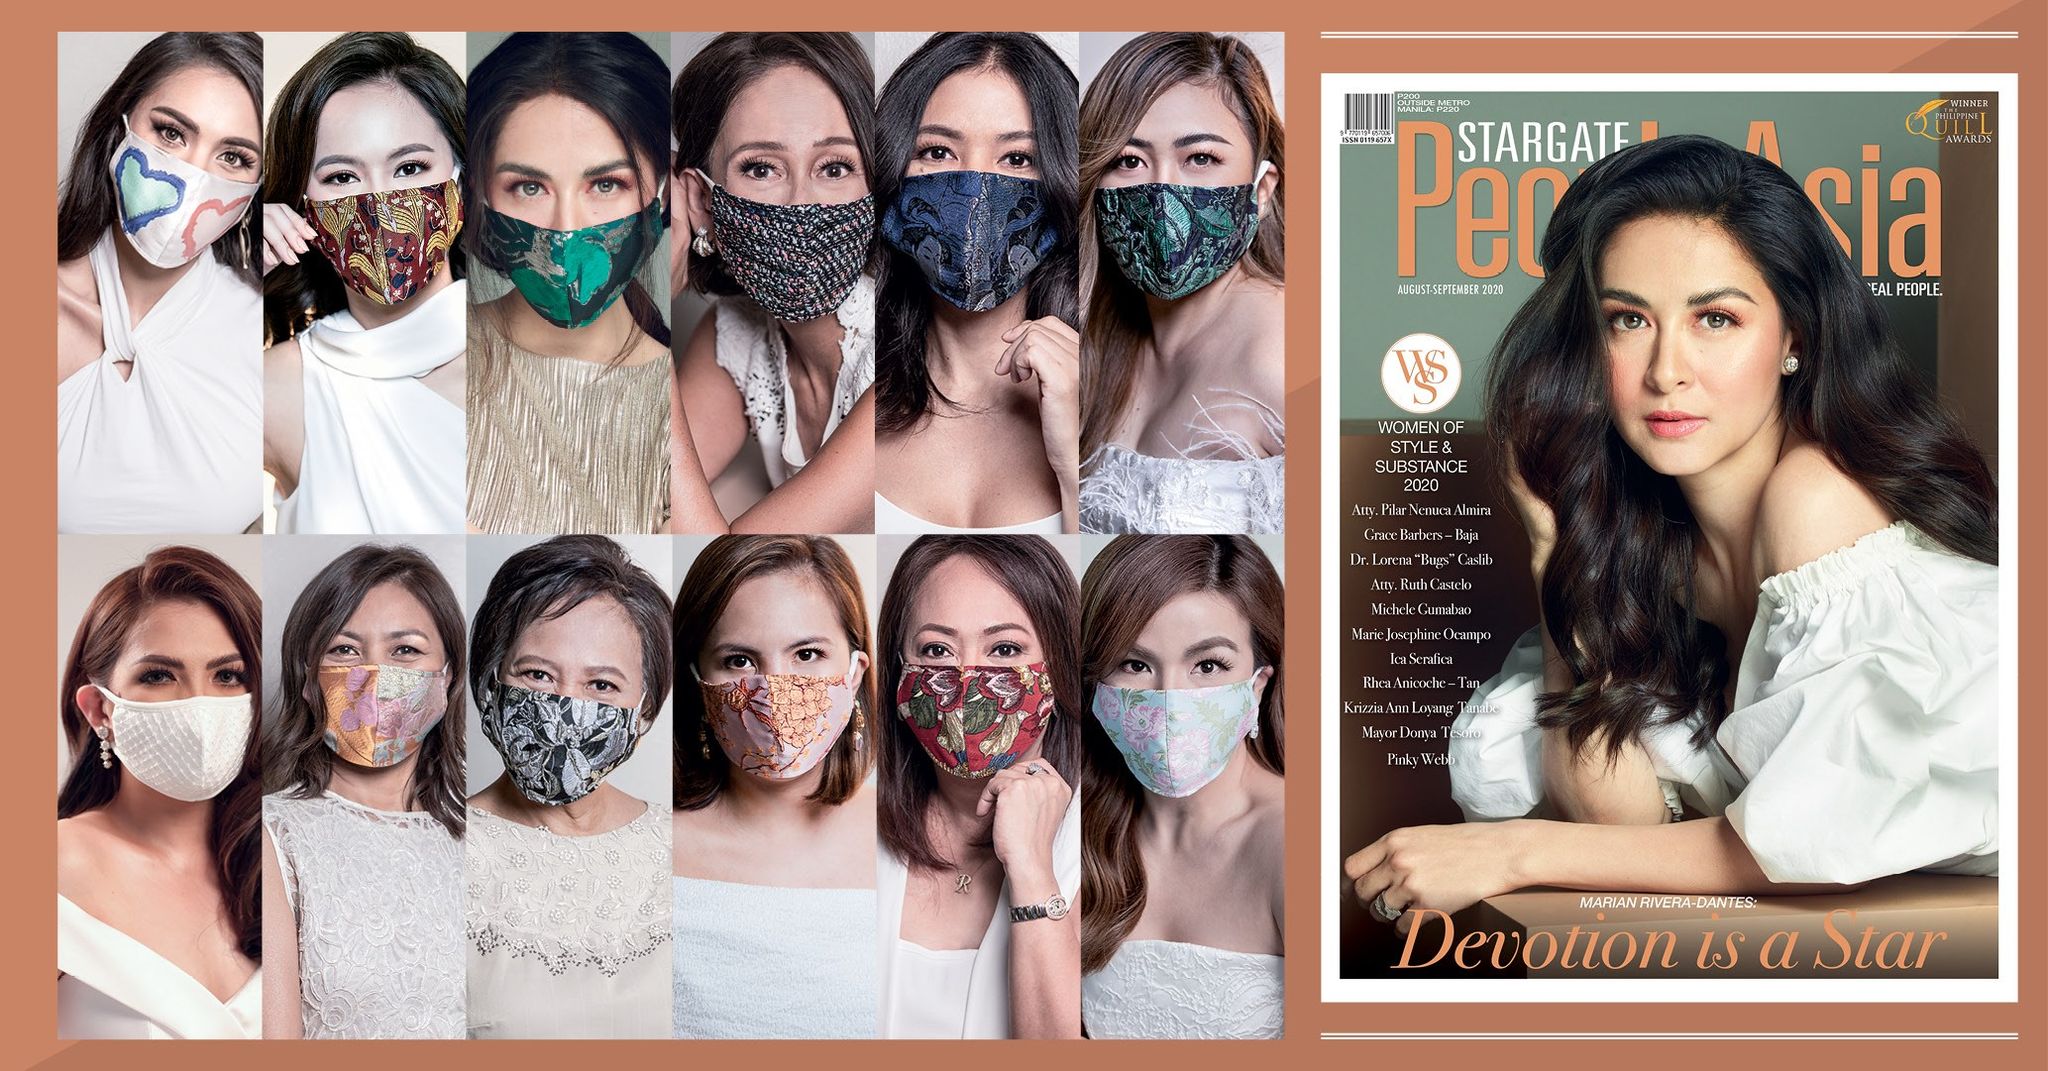 Unmasking PeopleAsia’s ‘Women of Style & Substance’